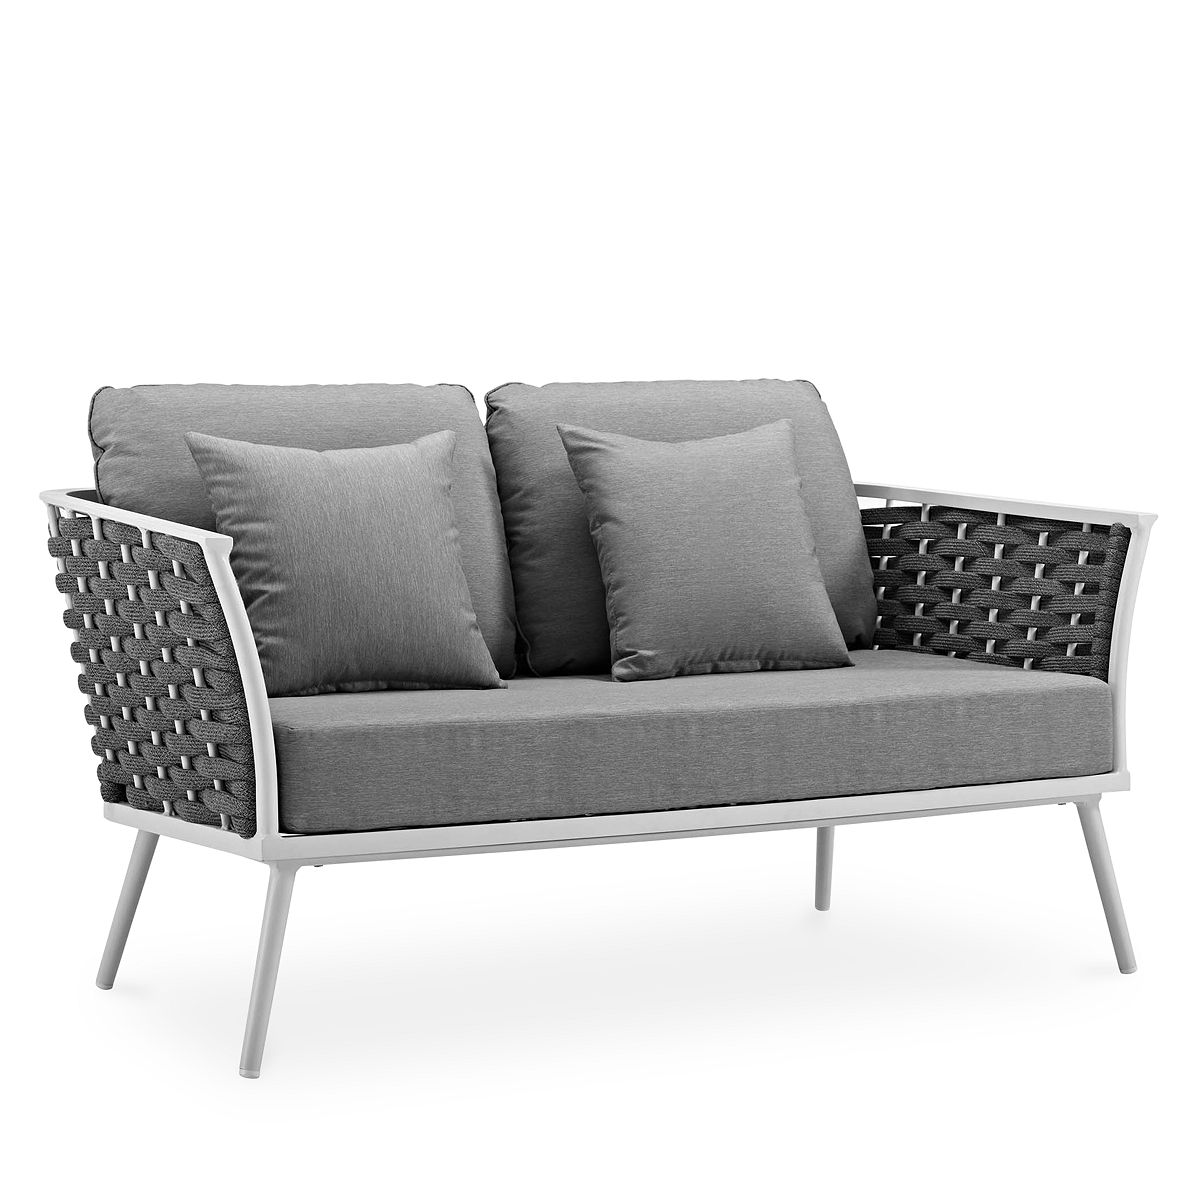 Photo 1 of Stance Outdoor Patio Loveseat